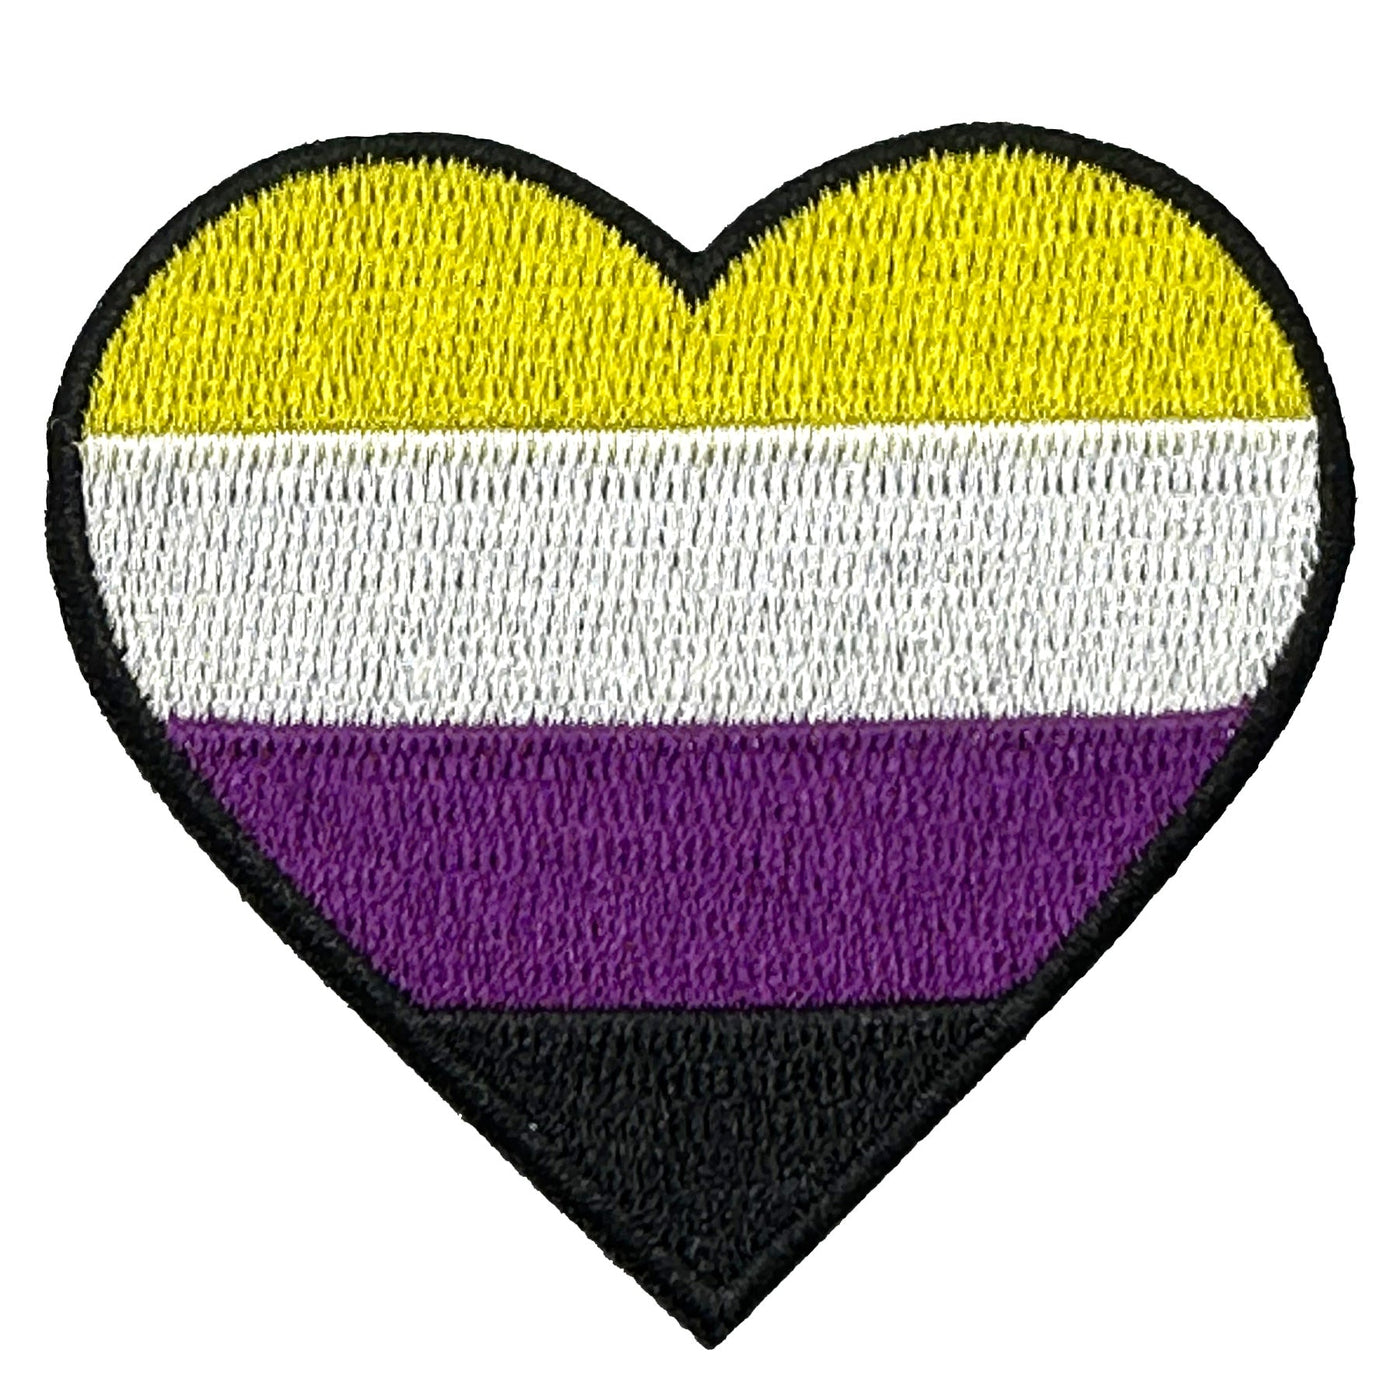 Non Binary Heart Embroidered Iron-On Patch